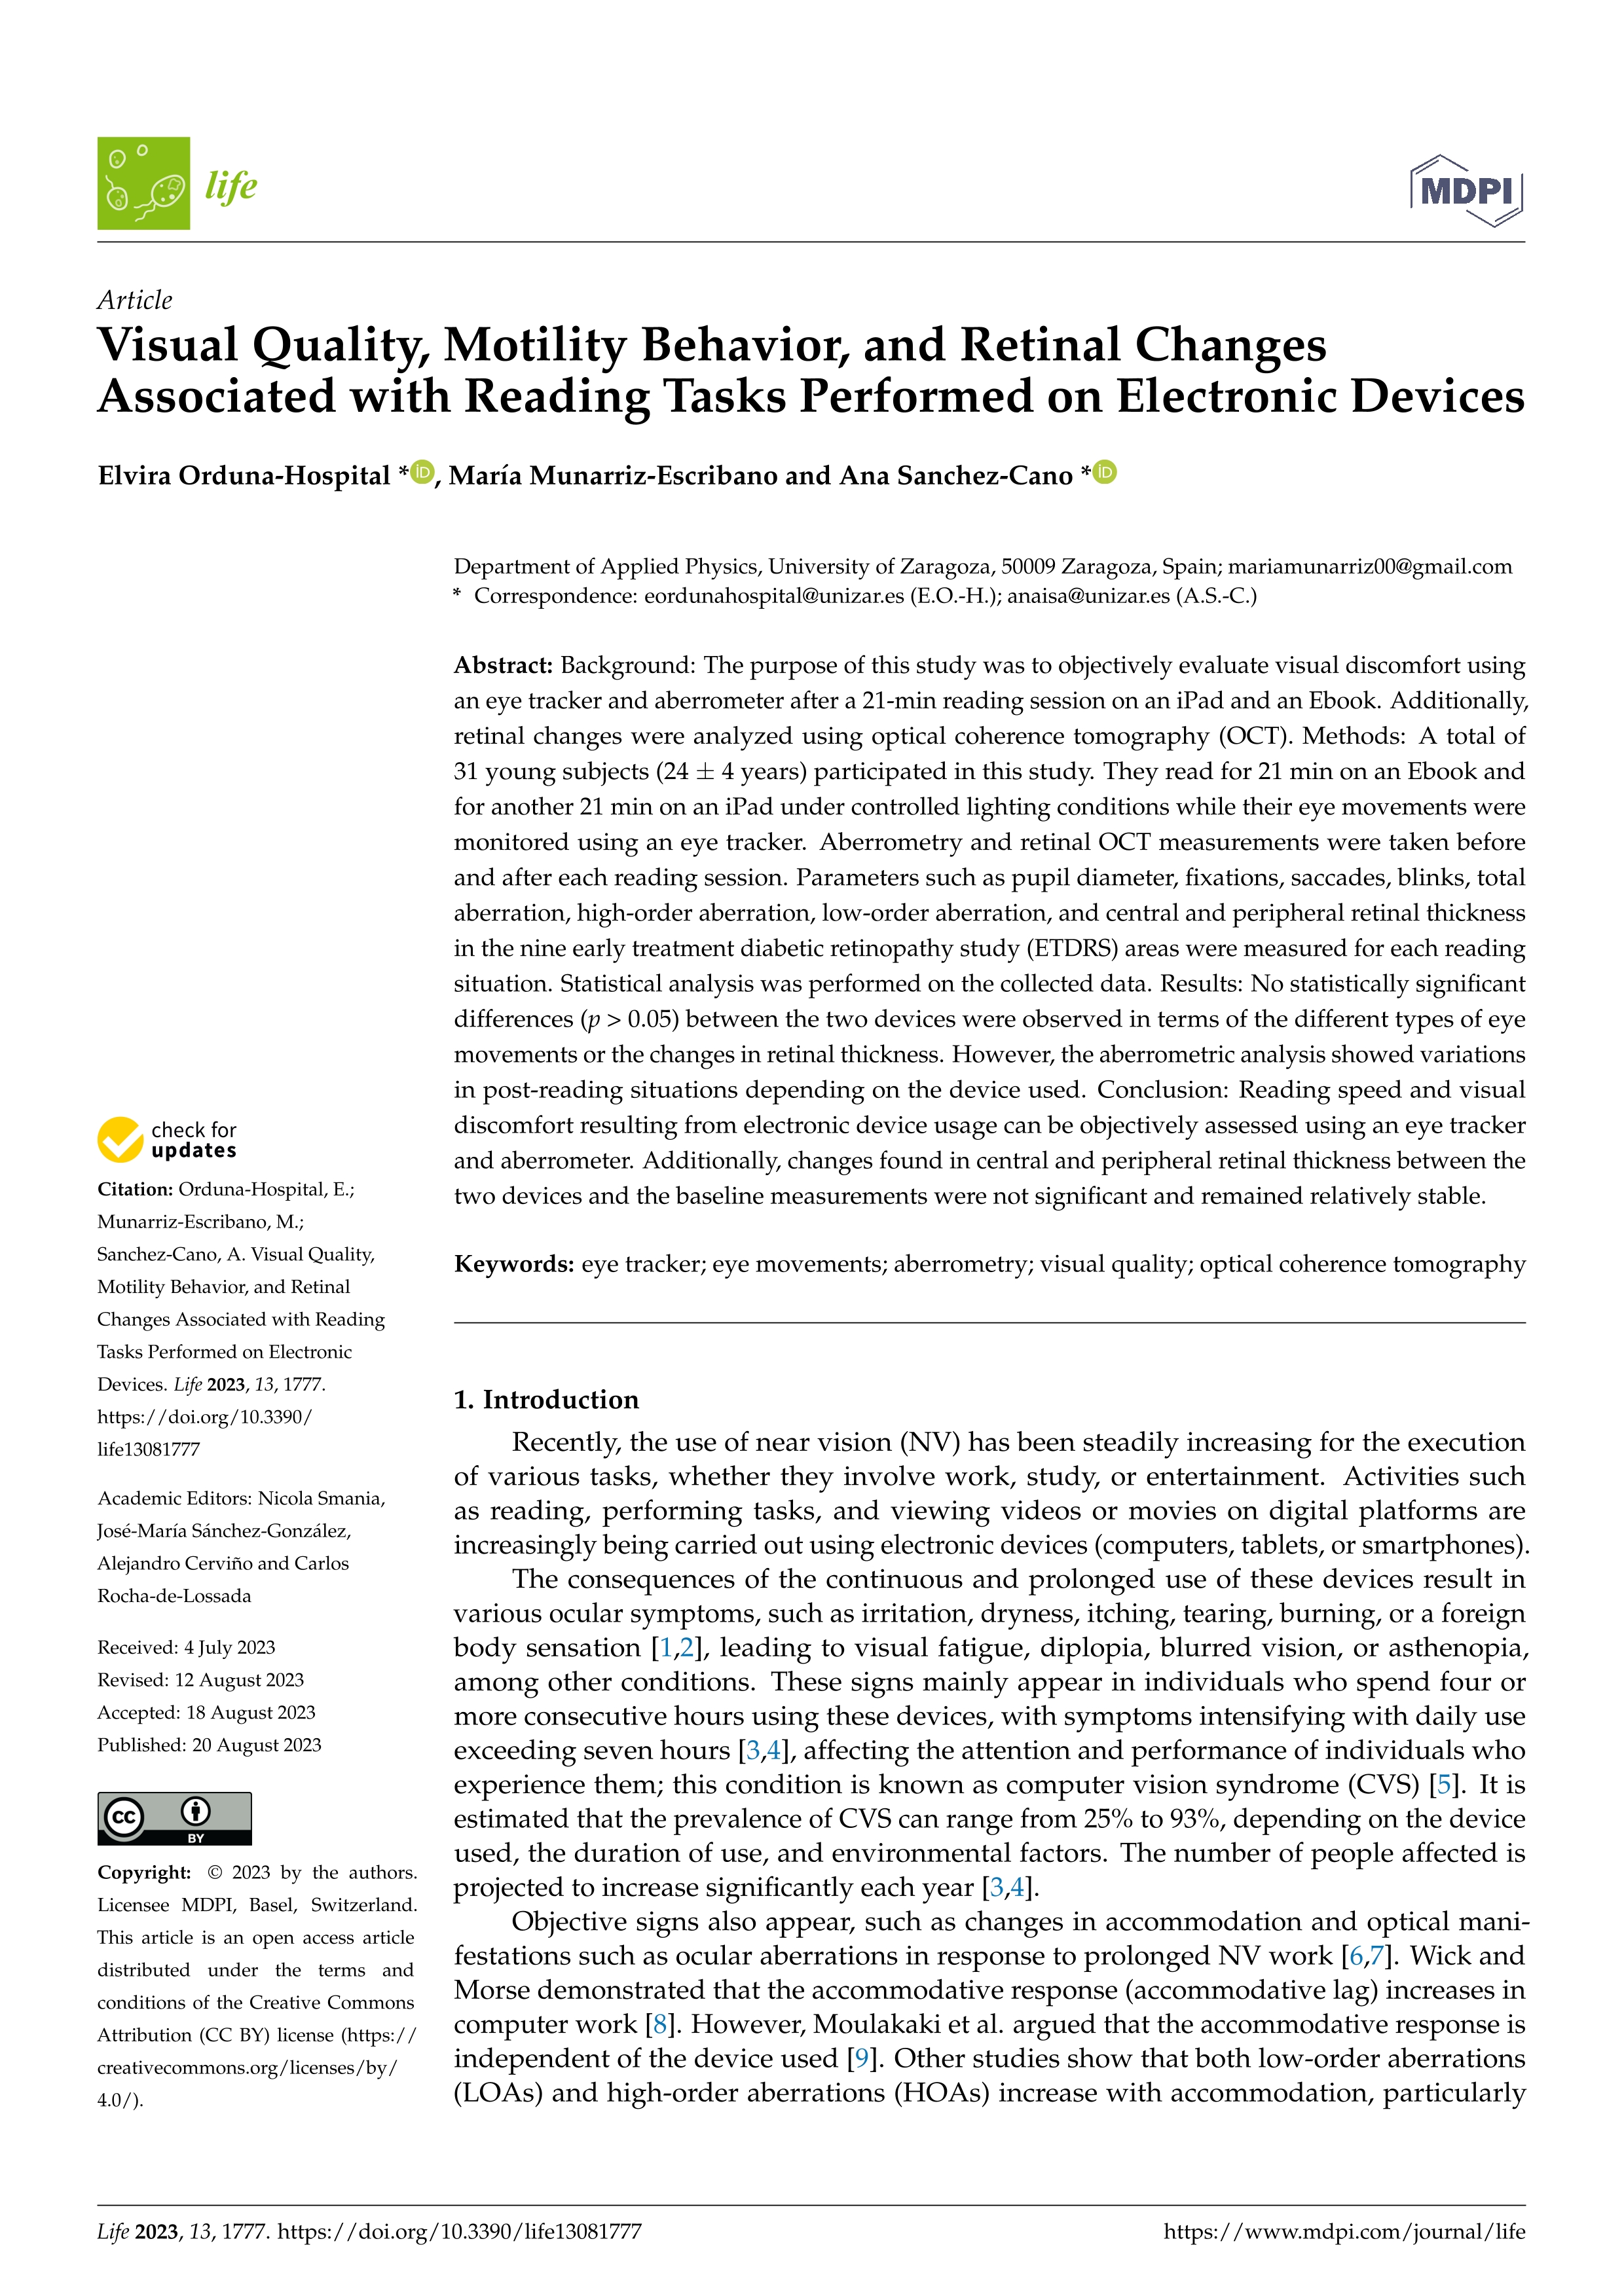 Visual Quality, Motility Behavior, and Retinal Changes Associated with Reading Tasks Performed on Electronic Devices